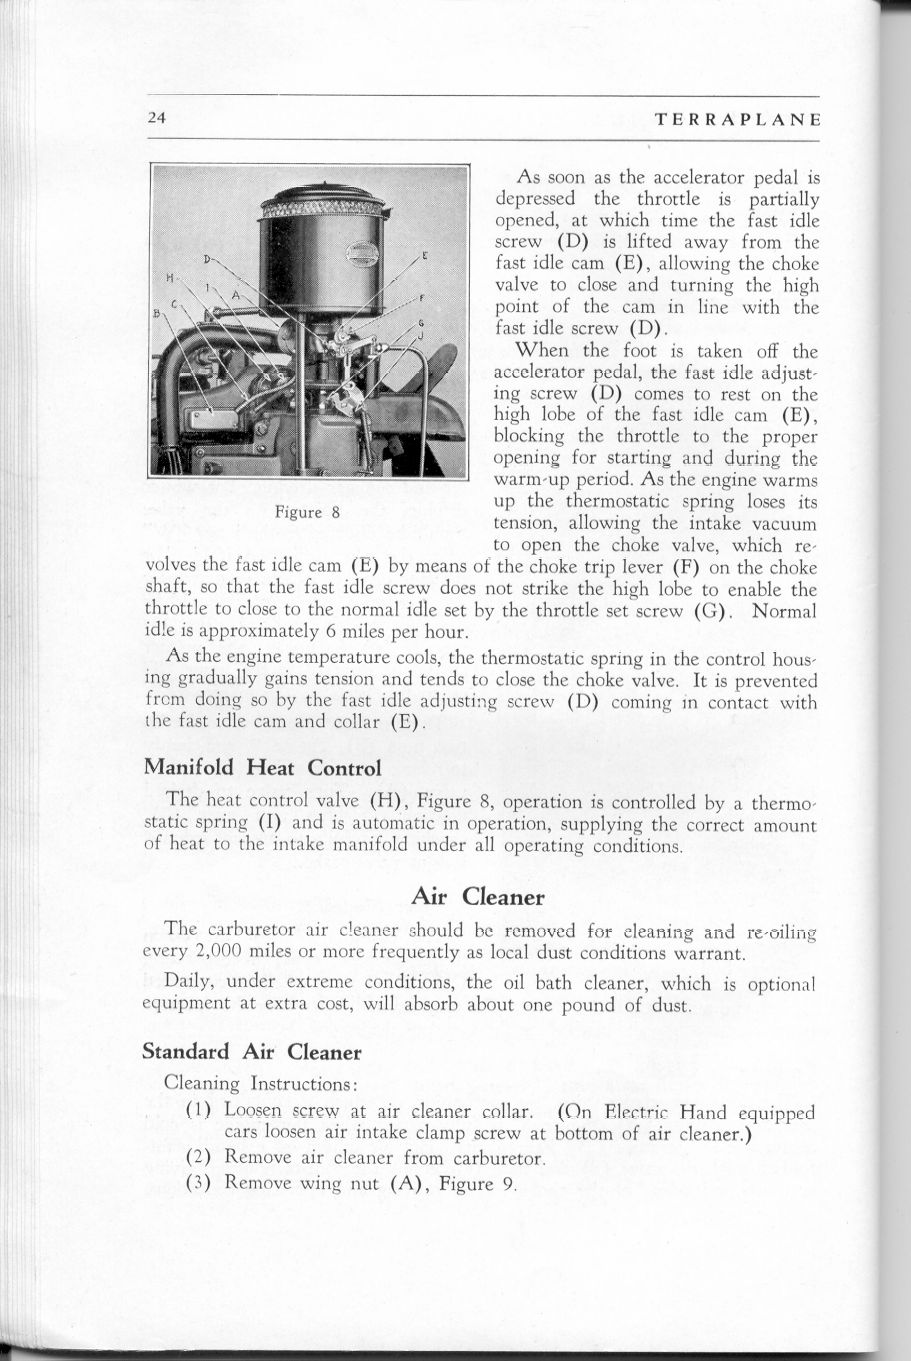 1937 Hudson Terraplane Owners Manual Page 13